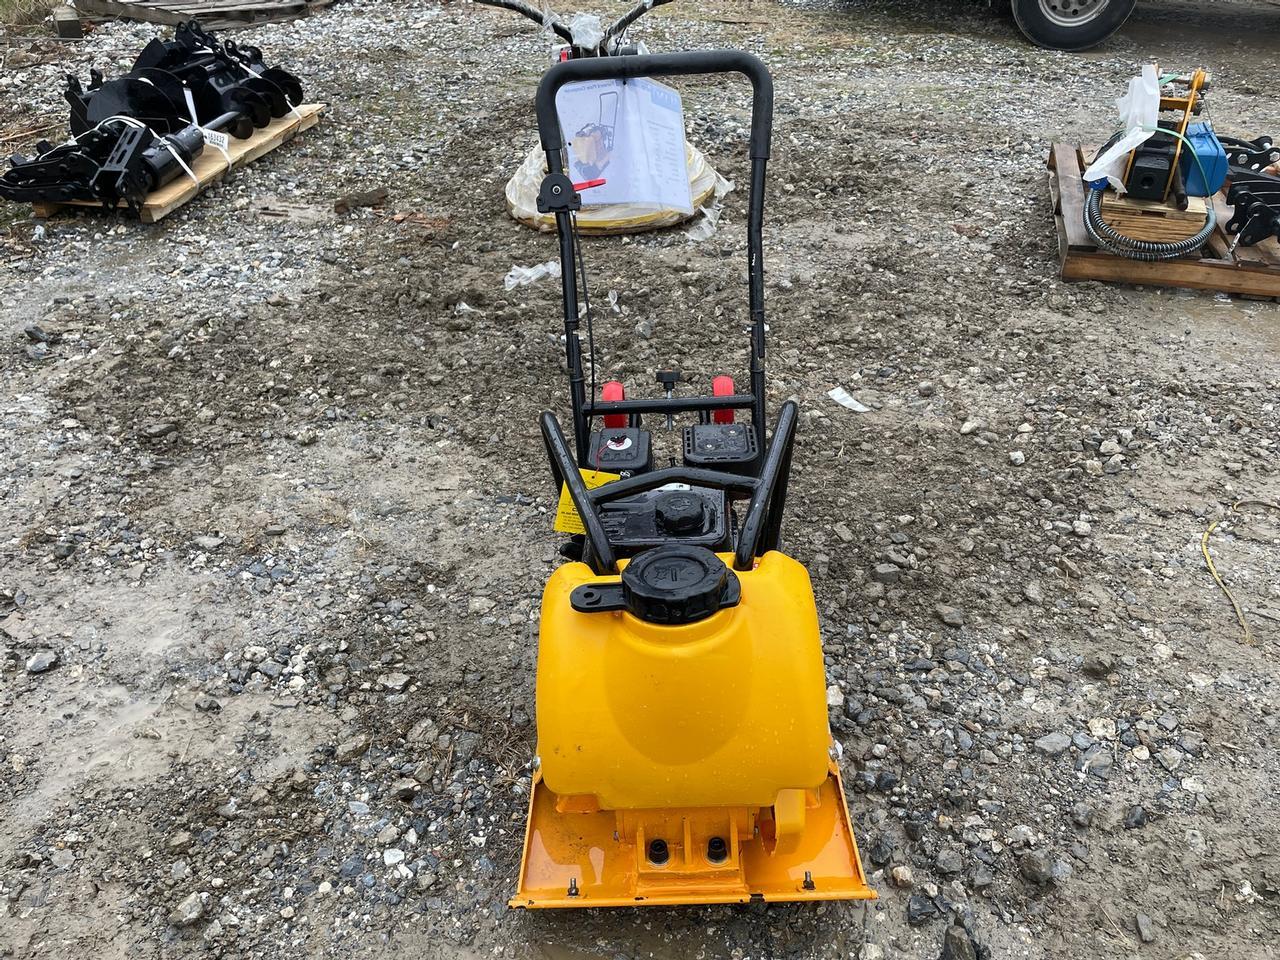 Fland FL90 Plate Compactor